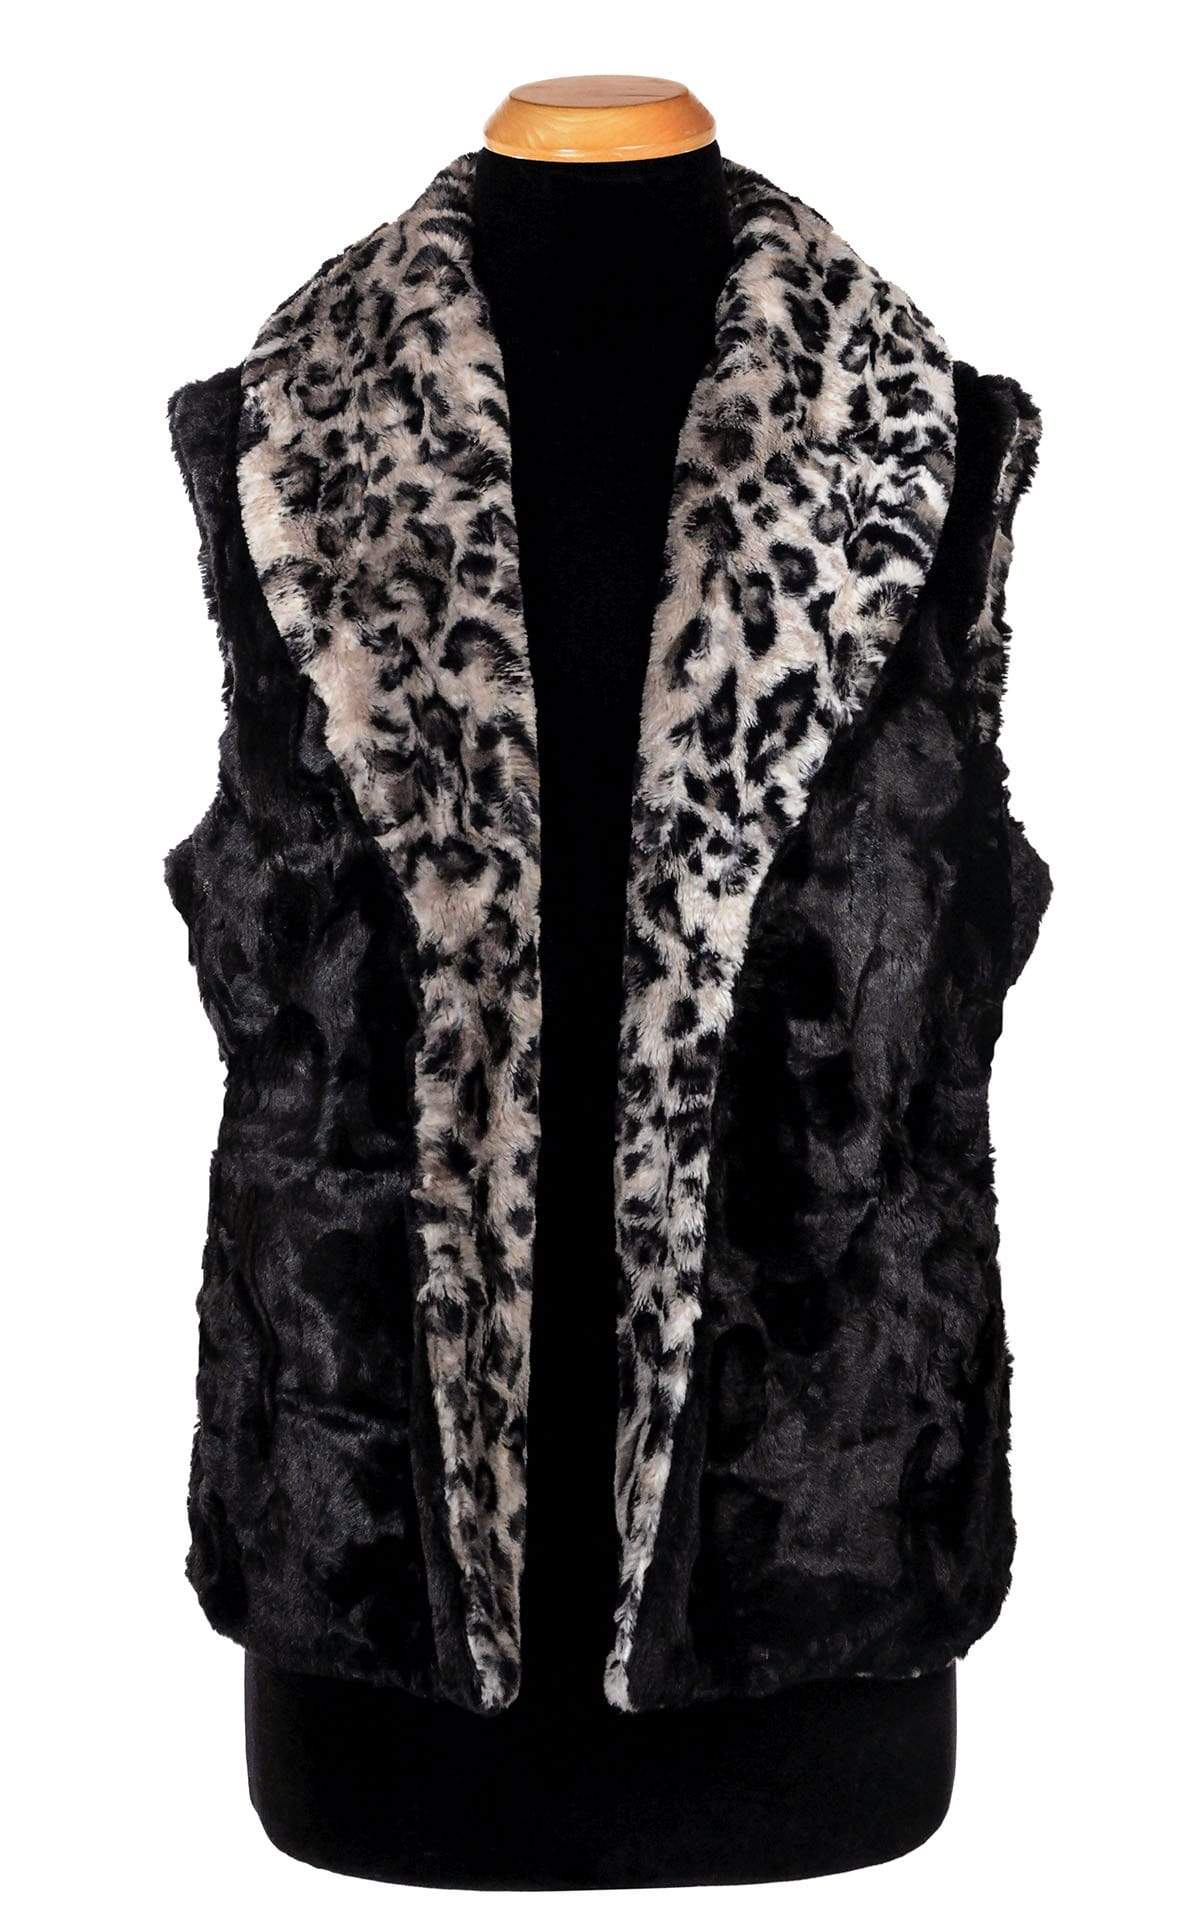 Shawl Collar Vest  Reversed | Savannah Cat in Gray Faux Fur with Cuddly Black Faux Fur | Handmade by Pandemonium Millinery | Seattle WA USA